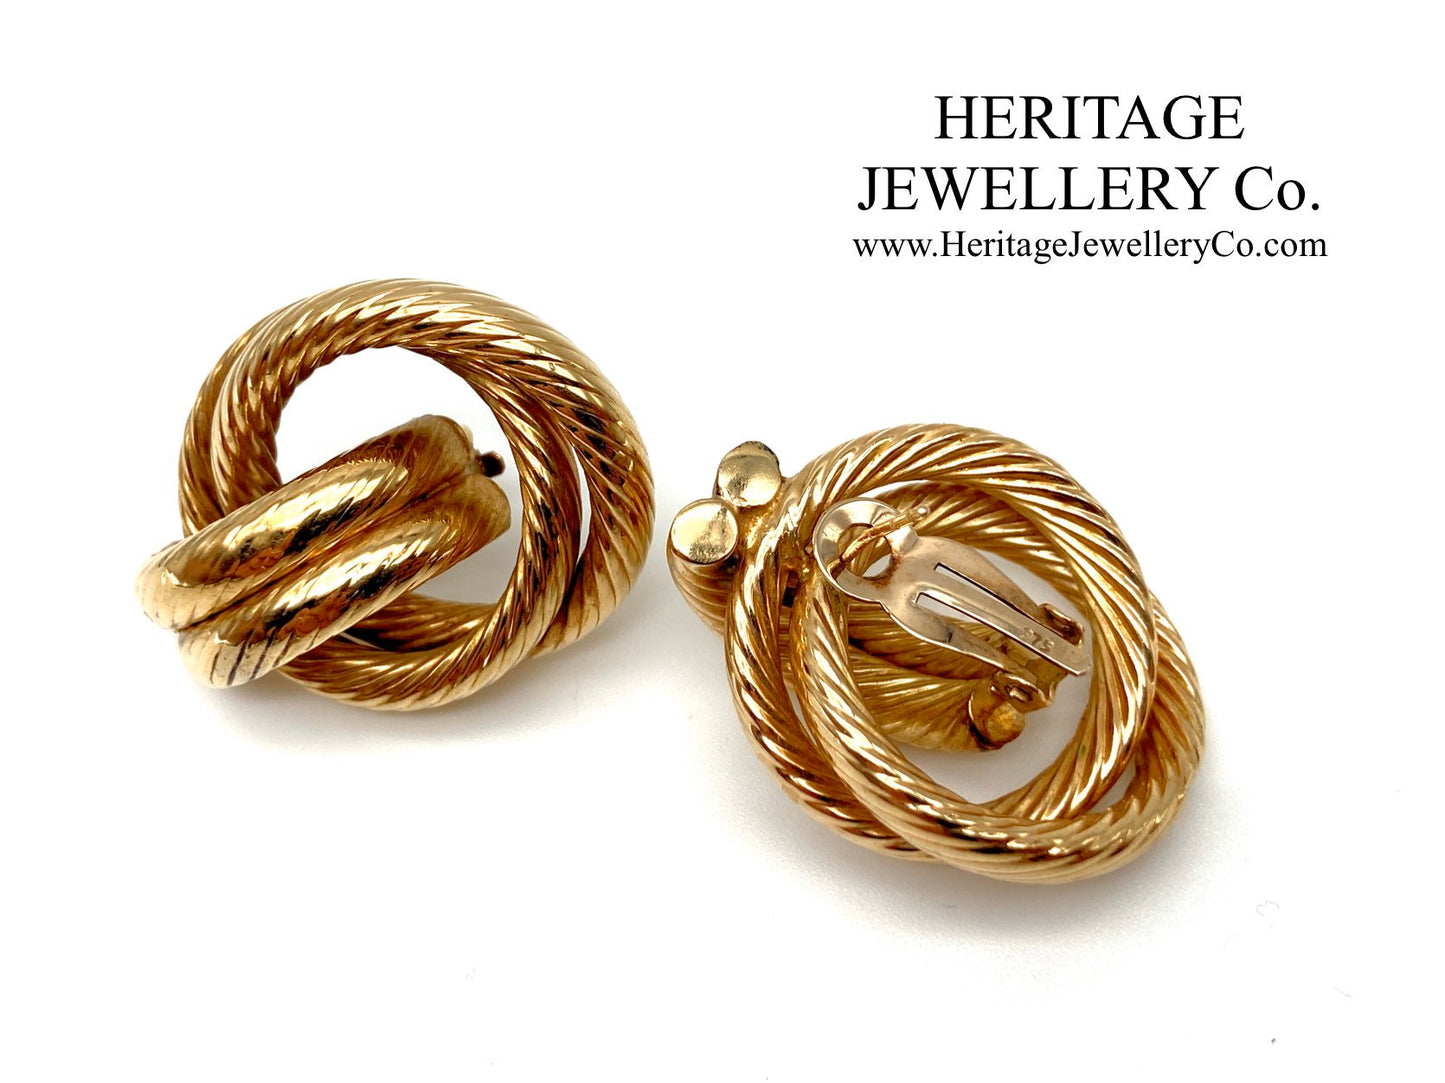 Large Vintage Gold Earrings with Rope Texture